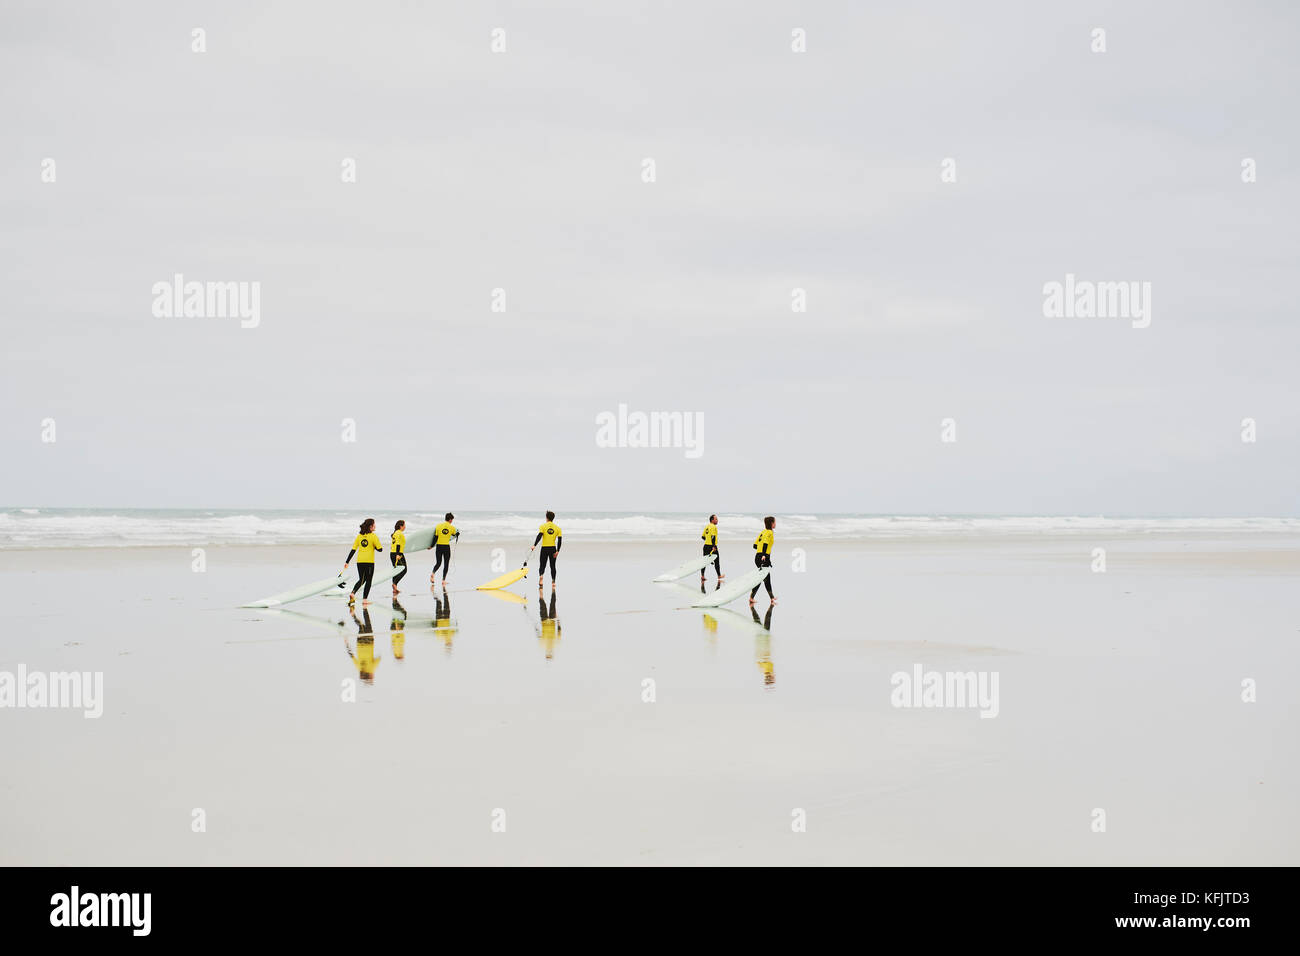 Surfing school students in yellow bibs with their surfboards at the Plage de la Torche Plomeur Finistere Brittany France Stock Photo